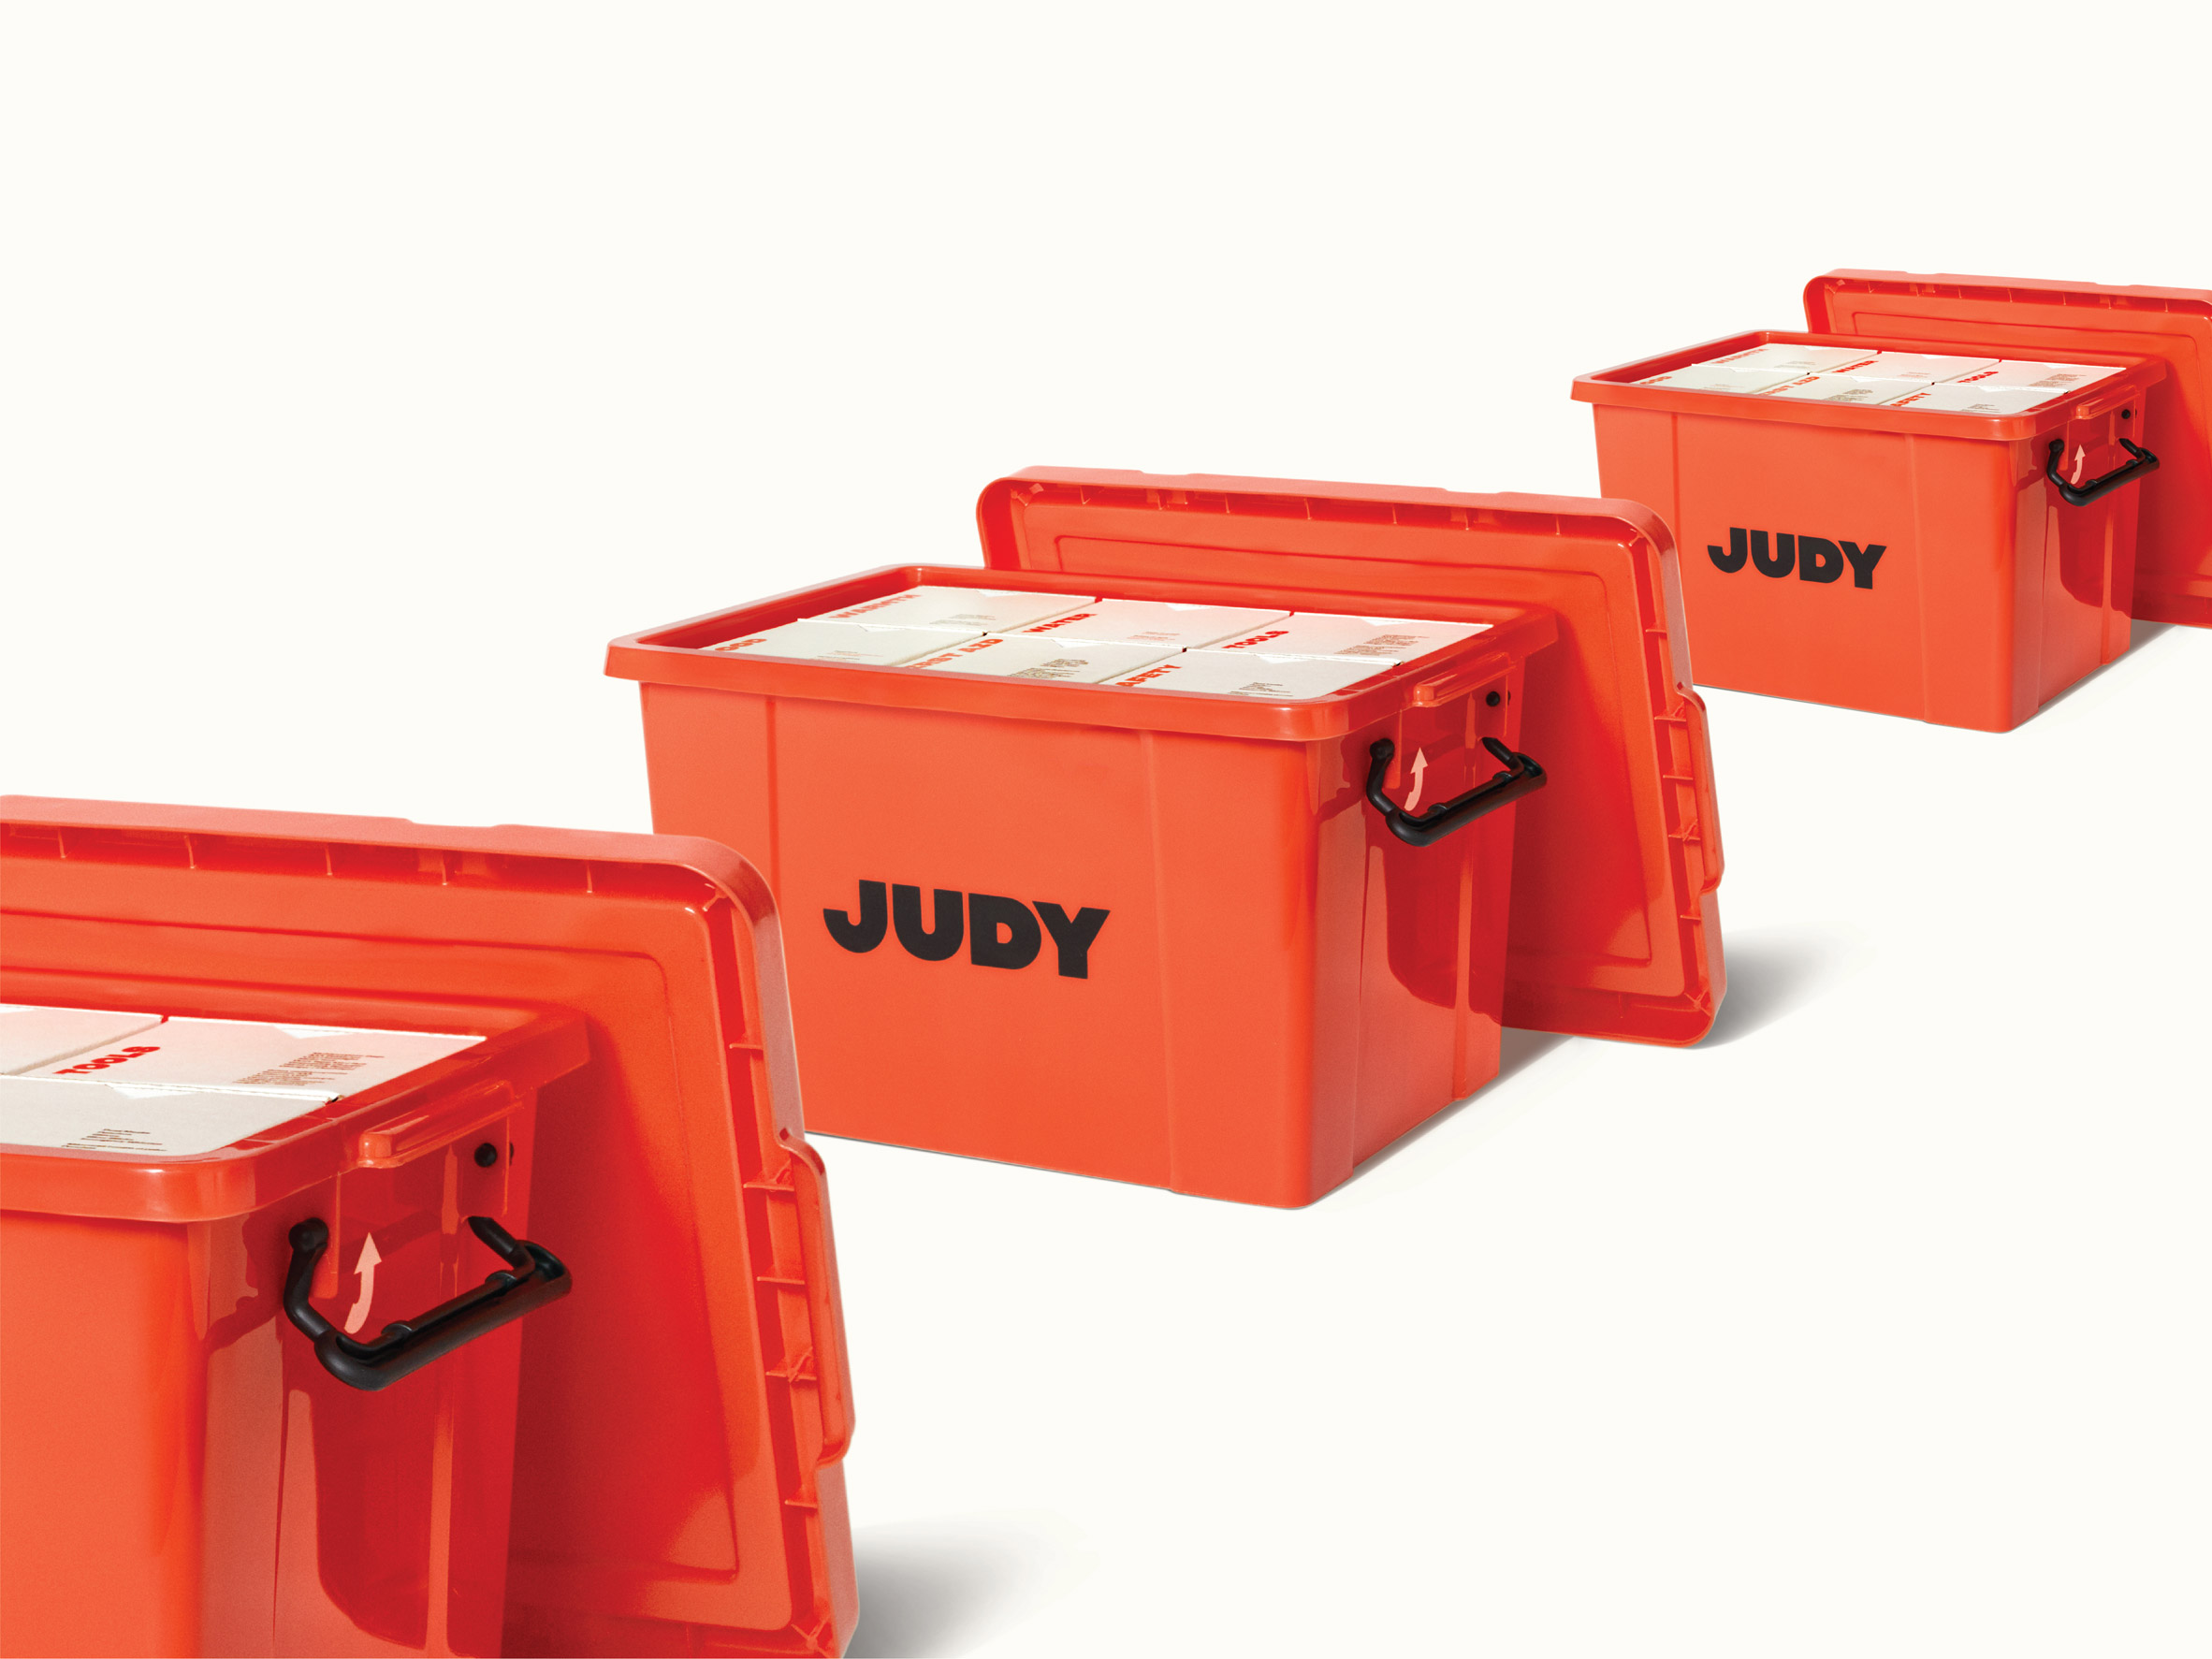 Red Antler designs "no-nonsense" Judy kits for emergency situations